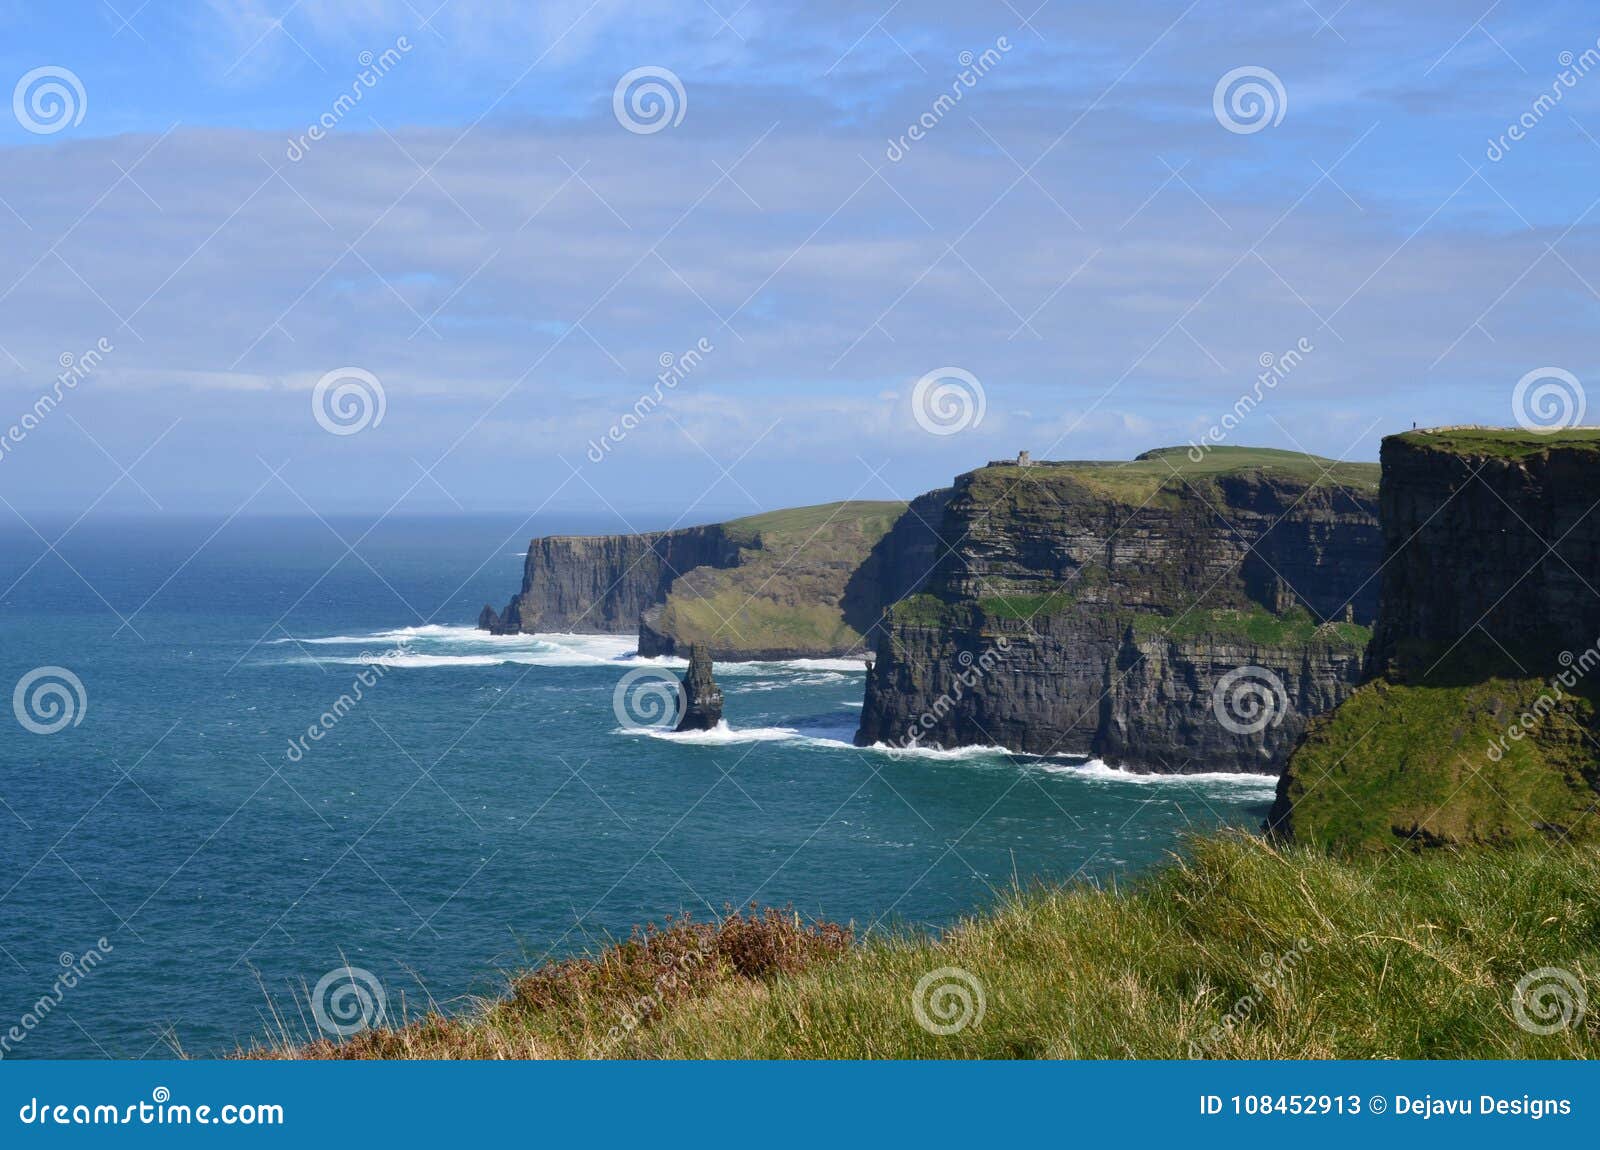 breathtaking view of the landscape of the cliffs of moher